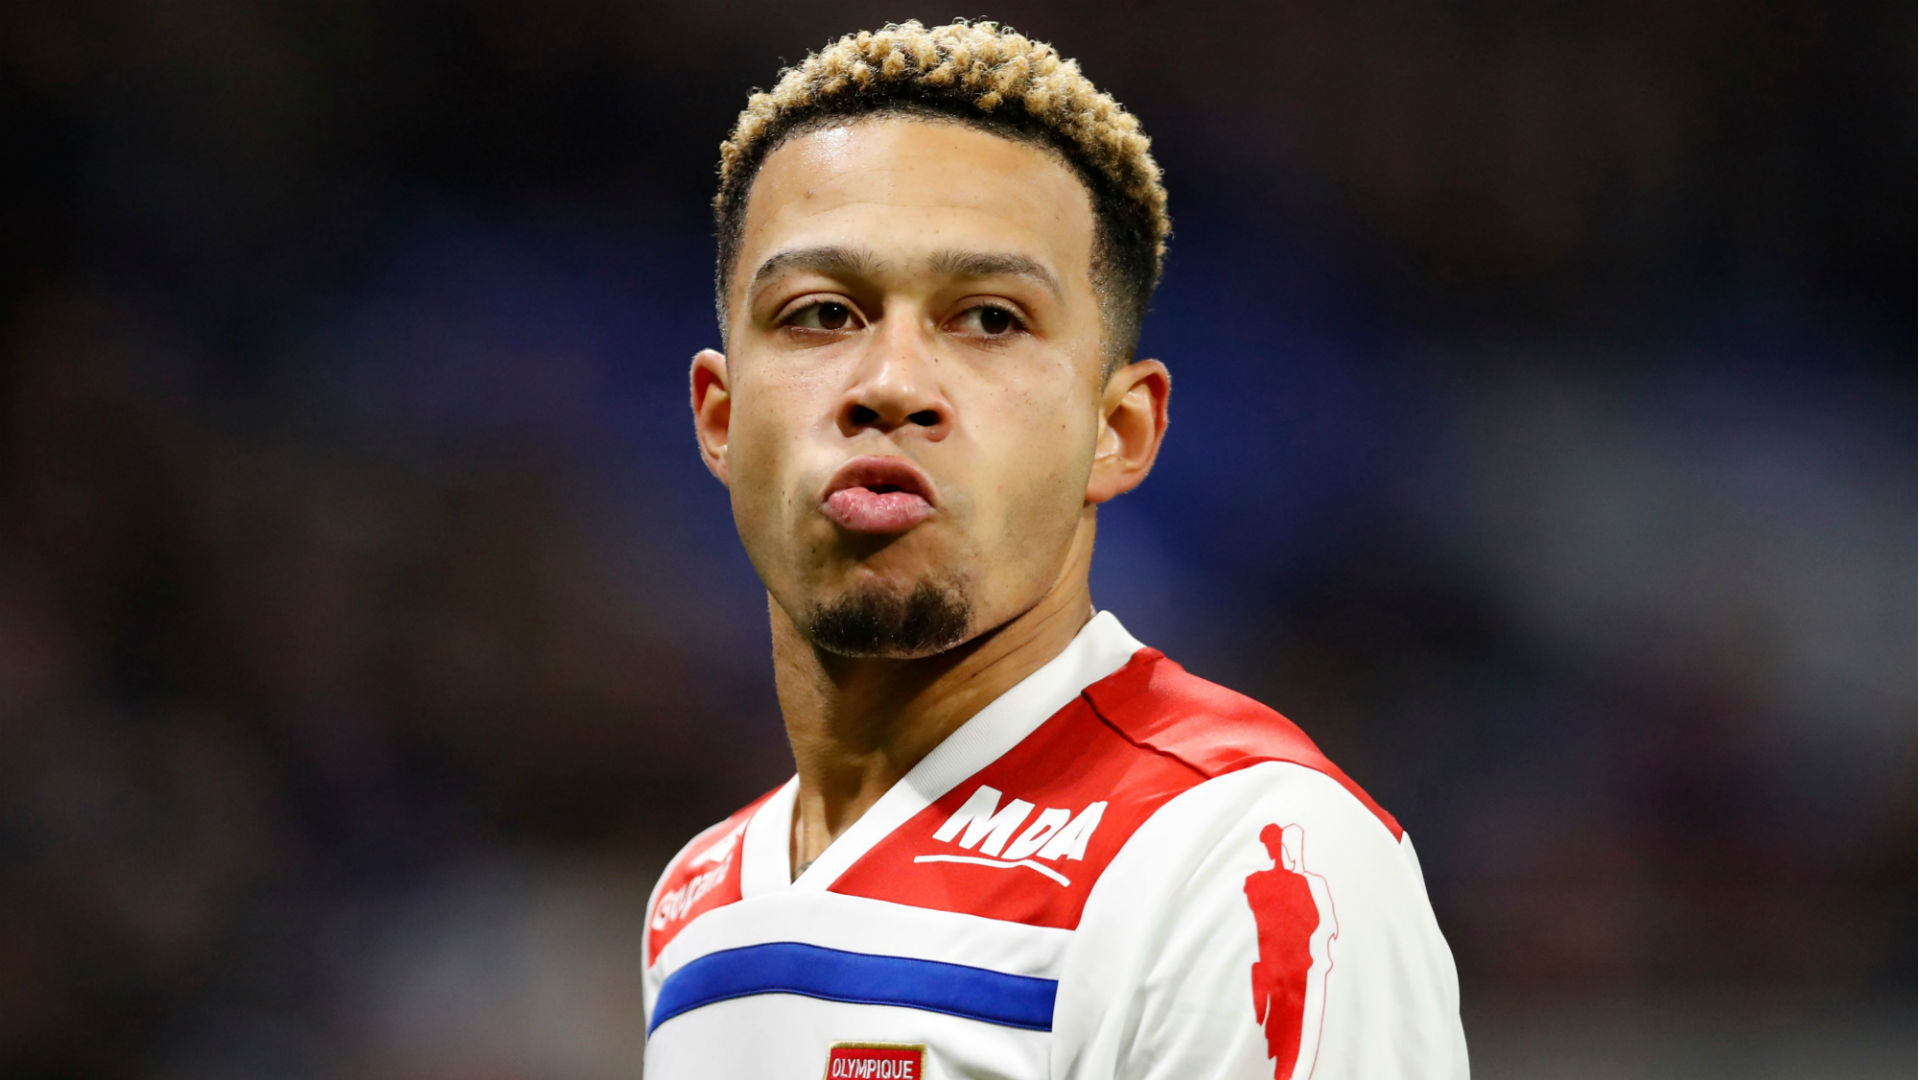 Rafael has backed Lyon team-mate Memphis Depay to become one of the best players in the world.